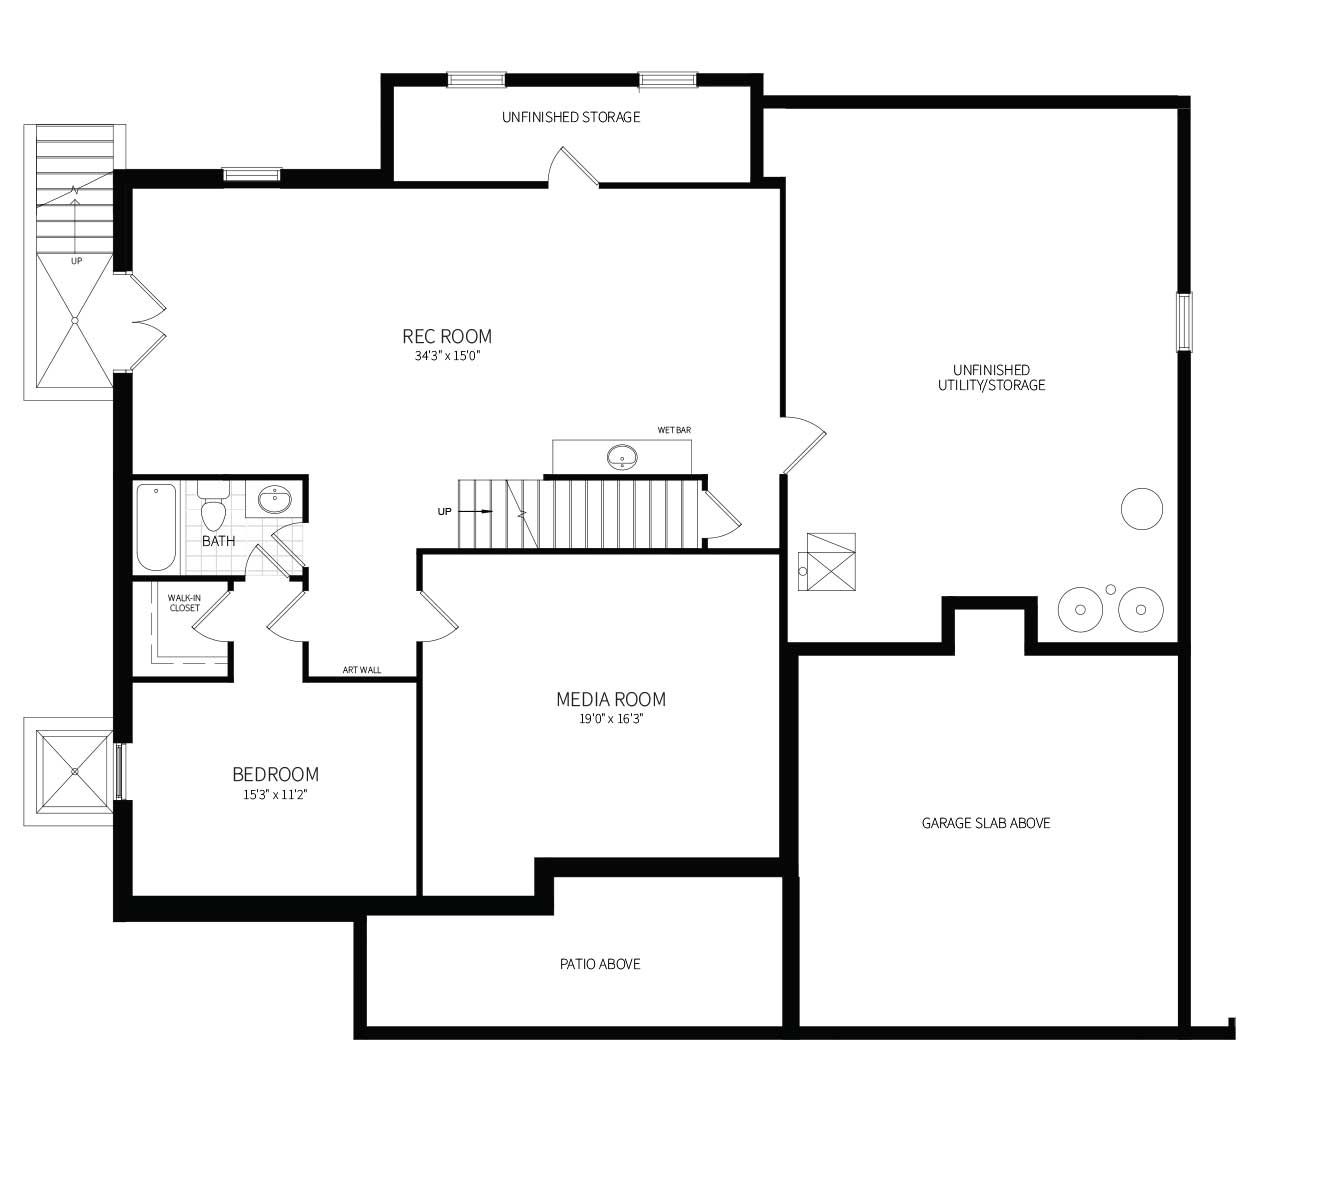 A proposed finished basement plan for the home proposed for 10827 Rock Run Dr with rec room, wet bar, bedroom and bath.